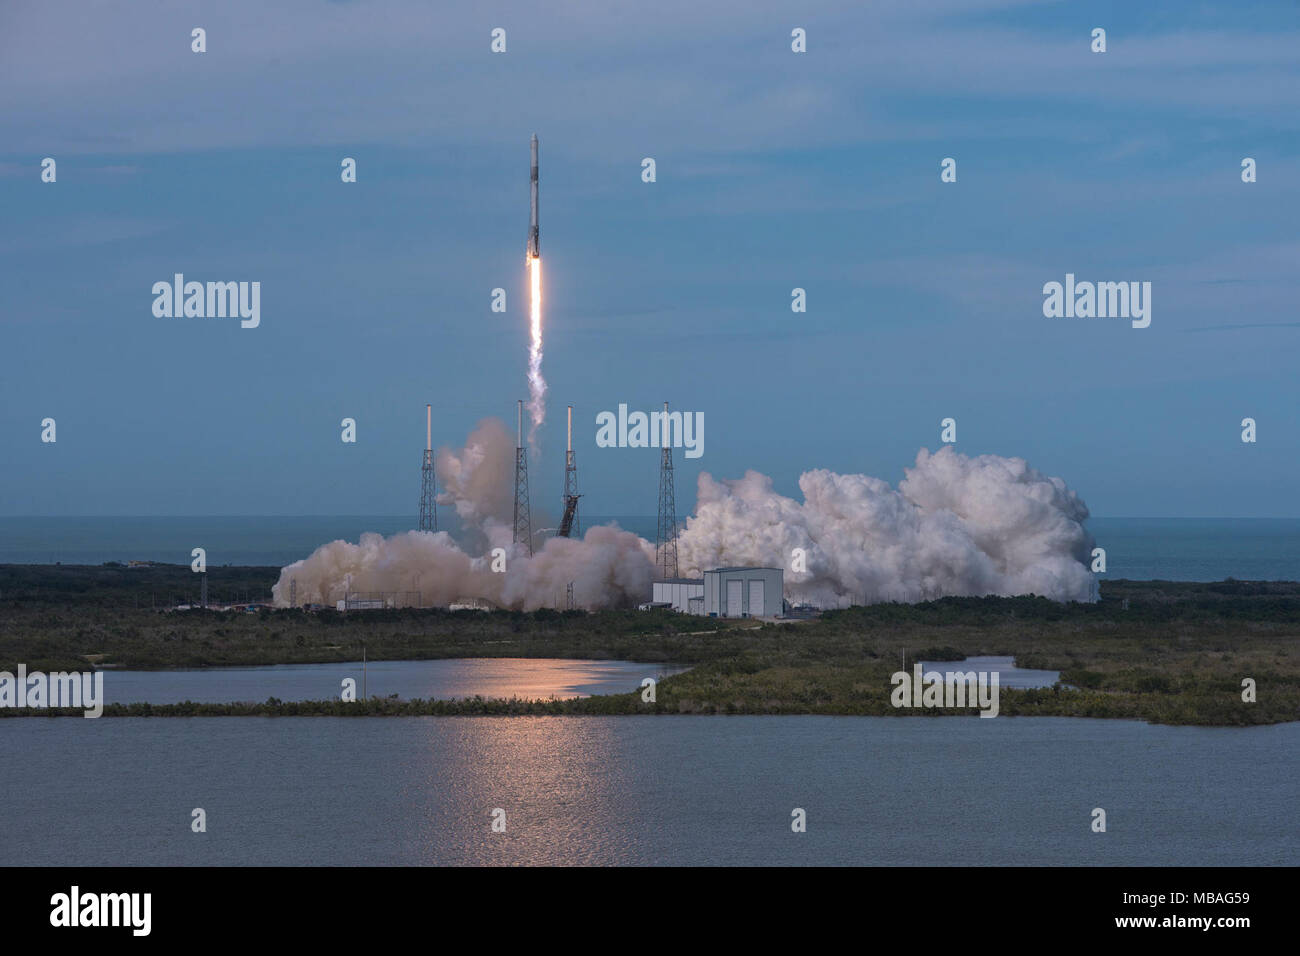 Spacex Commercial Resupply Services Mission CRS-14 Stockfoto